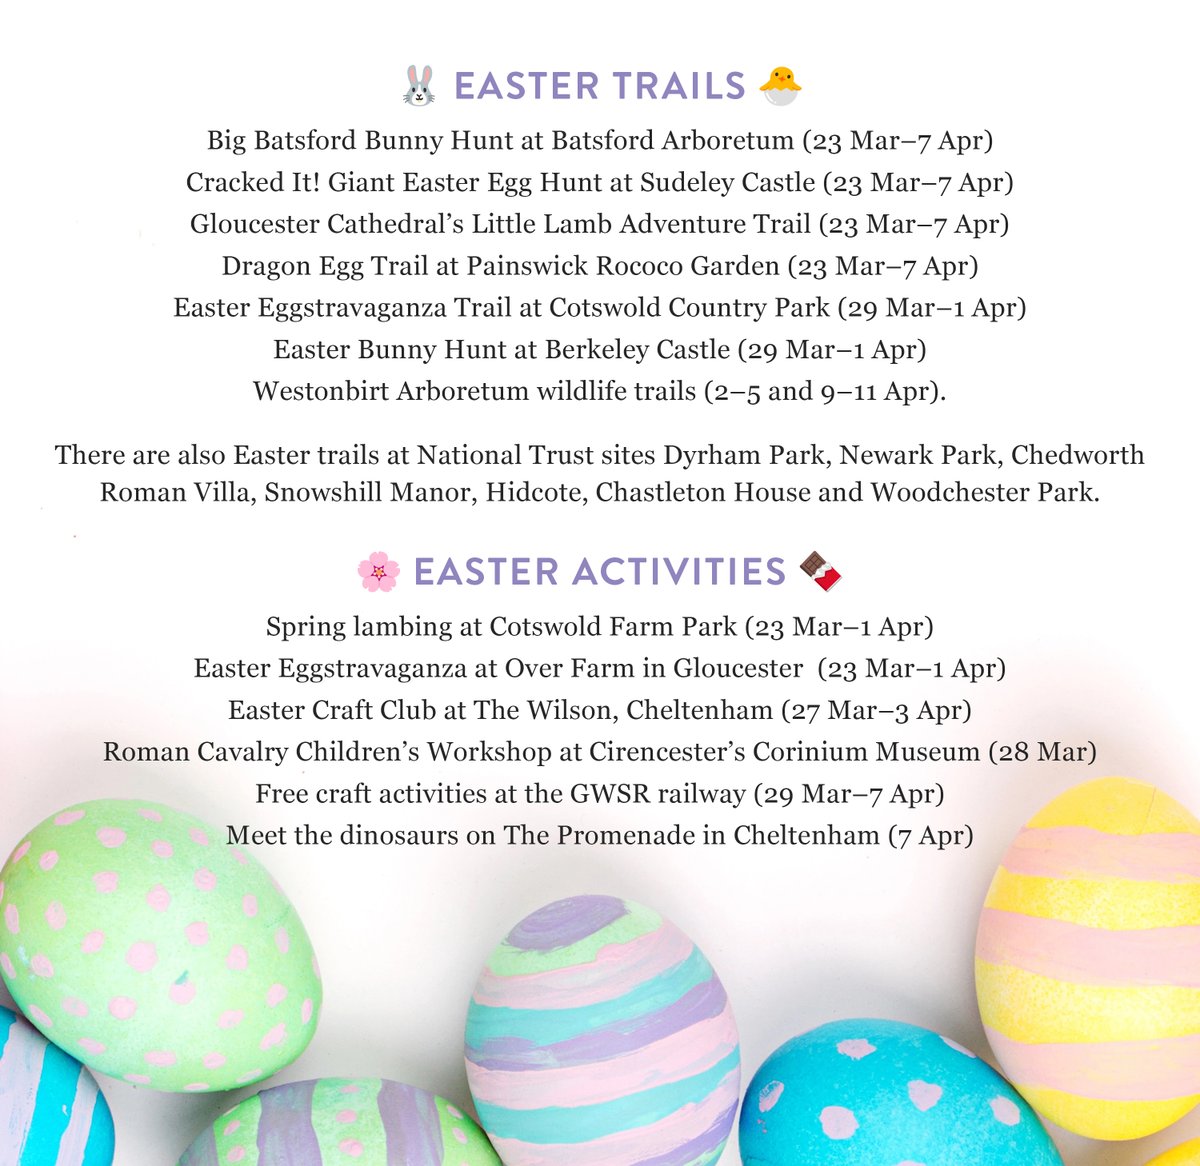 It's not long until Easter, and if you're looking for family-friendly activities to keep the kids occupied, there's lots coming up in the Cotswolds, including Easter egg hunts and trails, craft sessions and even a dinosaur or two…